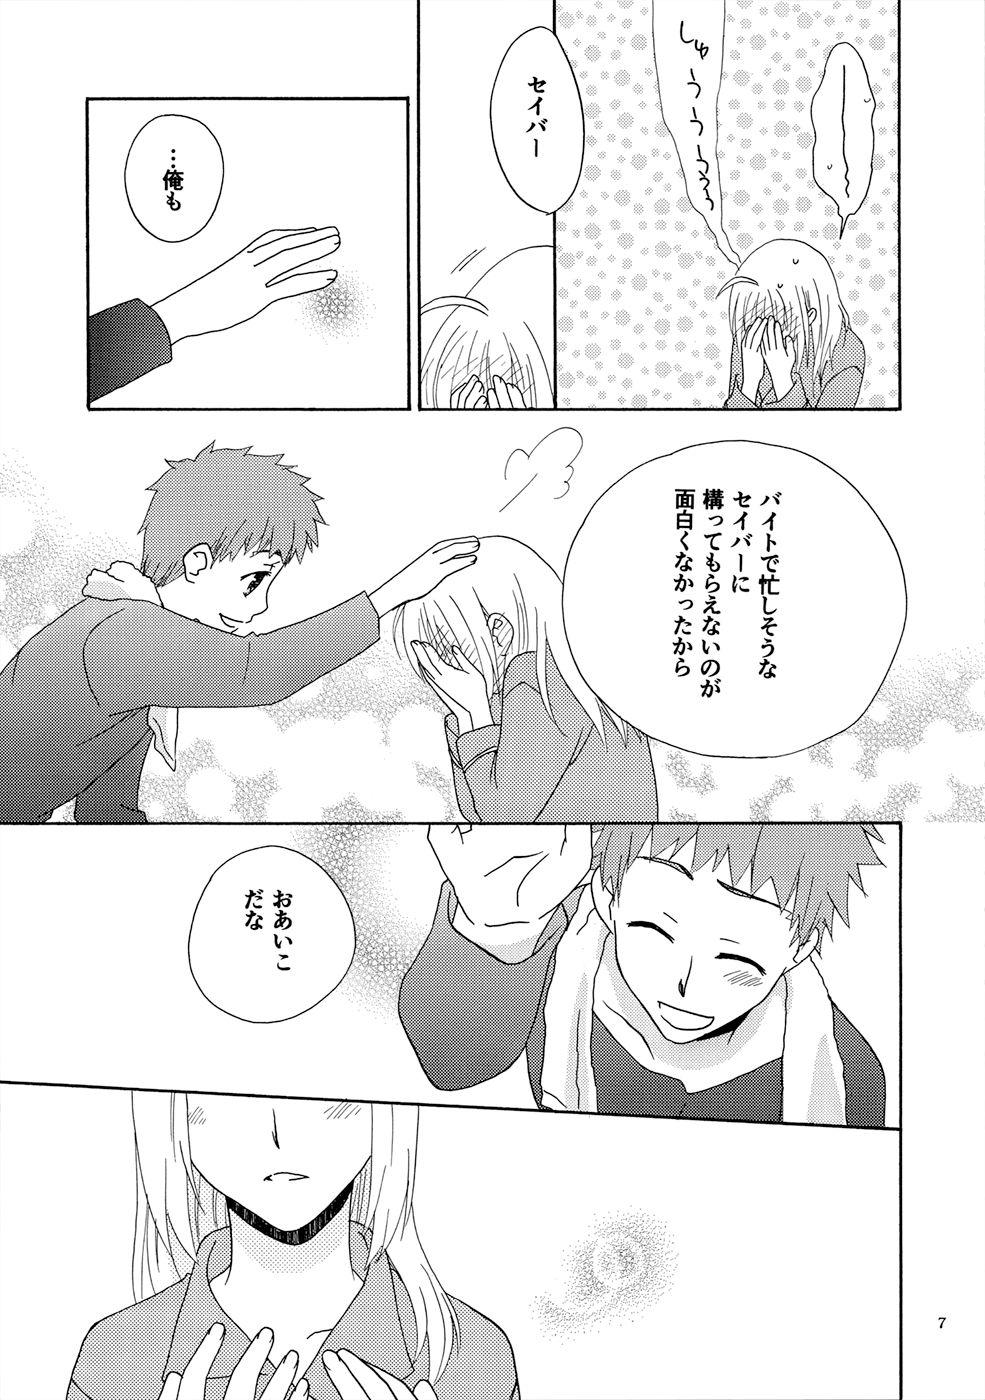 Assfingering POP STAR - Fate stay night Pink - Page 6